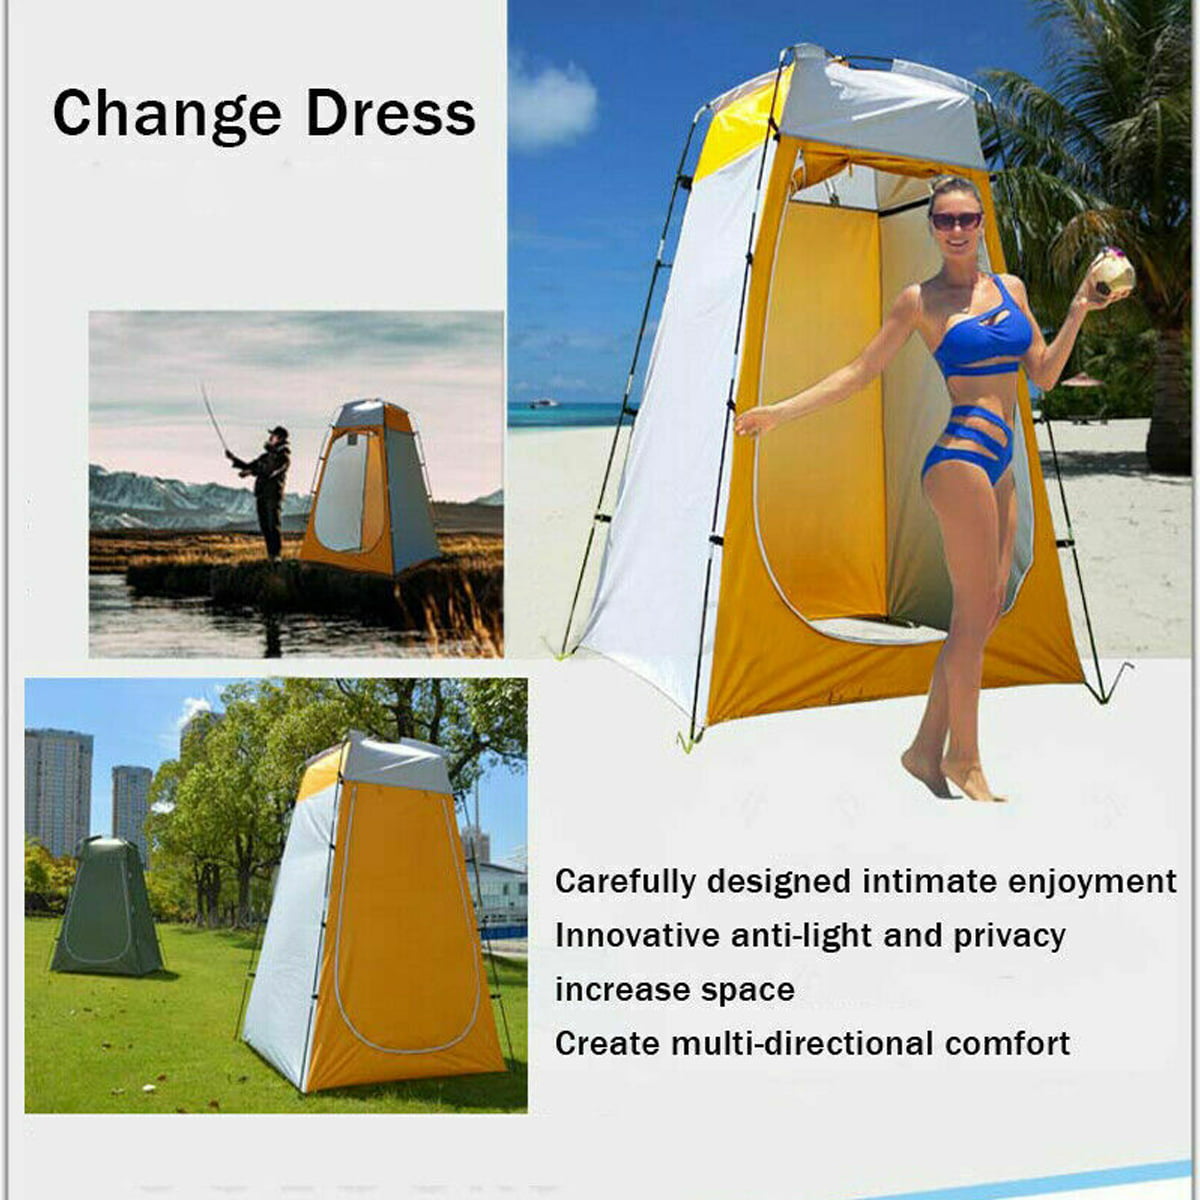 Portable Outdoor Shower Bath Changing Fitting Room Tent Camping Beach Blue V4C1 